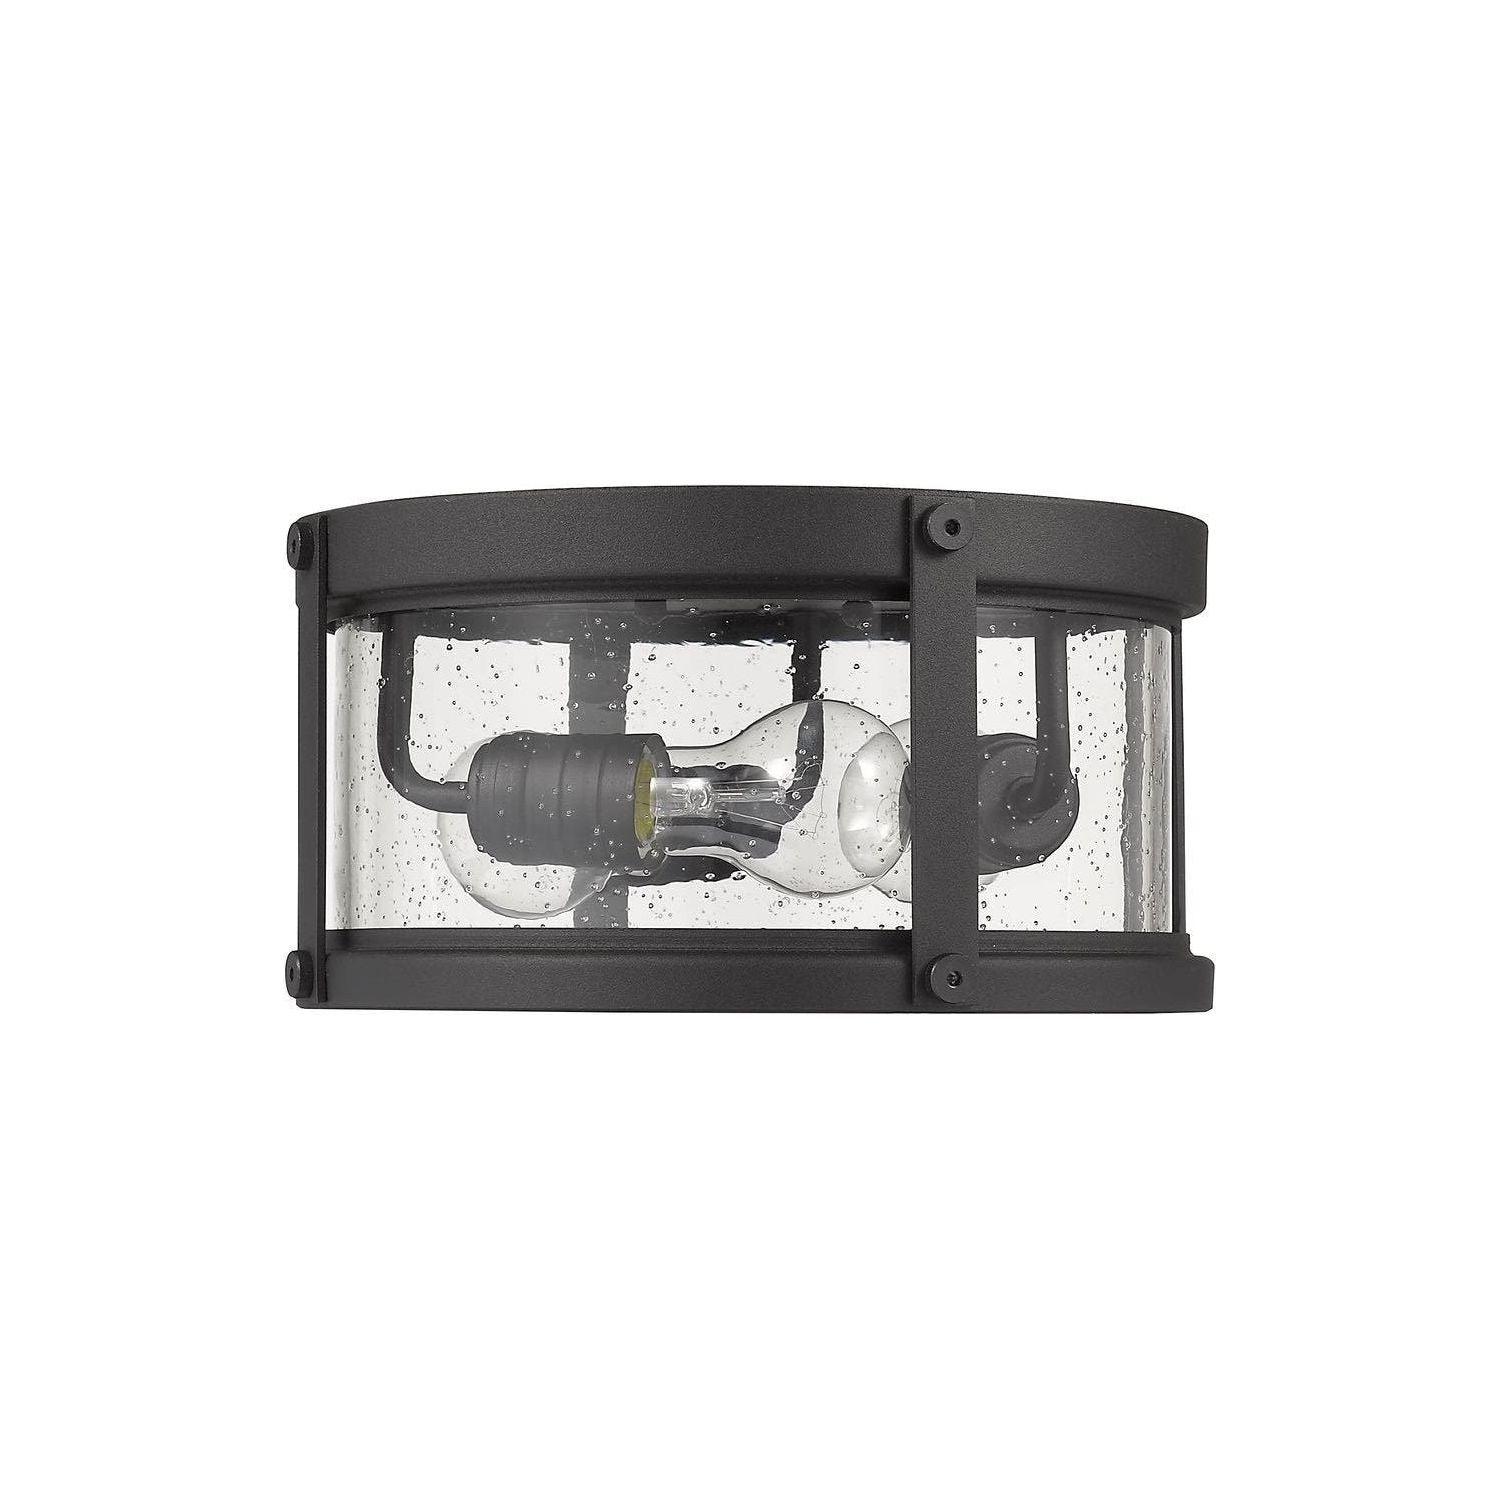 Z-Lite - Roundhouse Outdoor Ceiling Light - Lights Canada